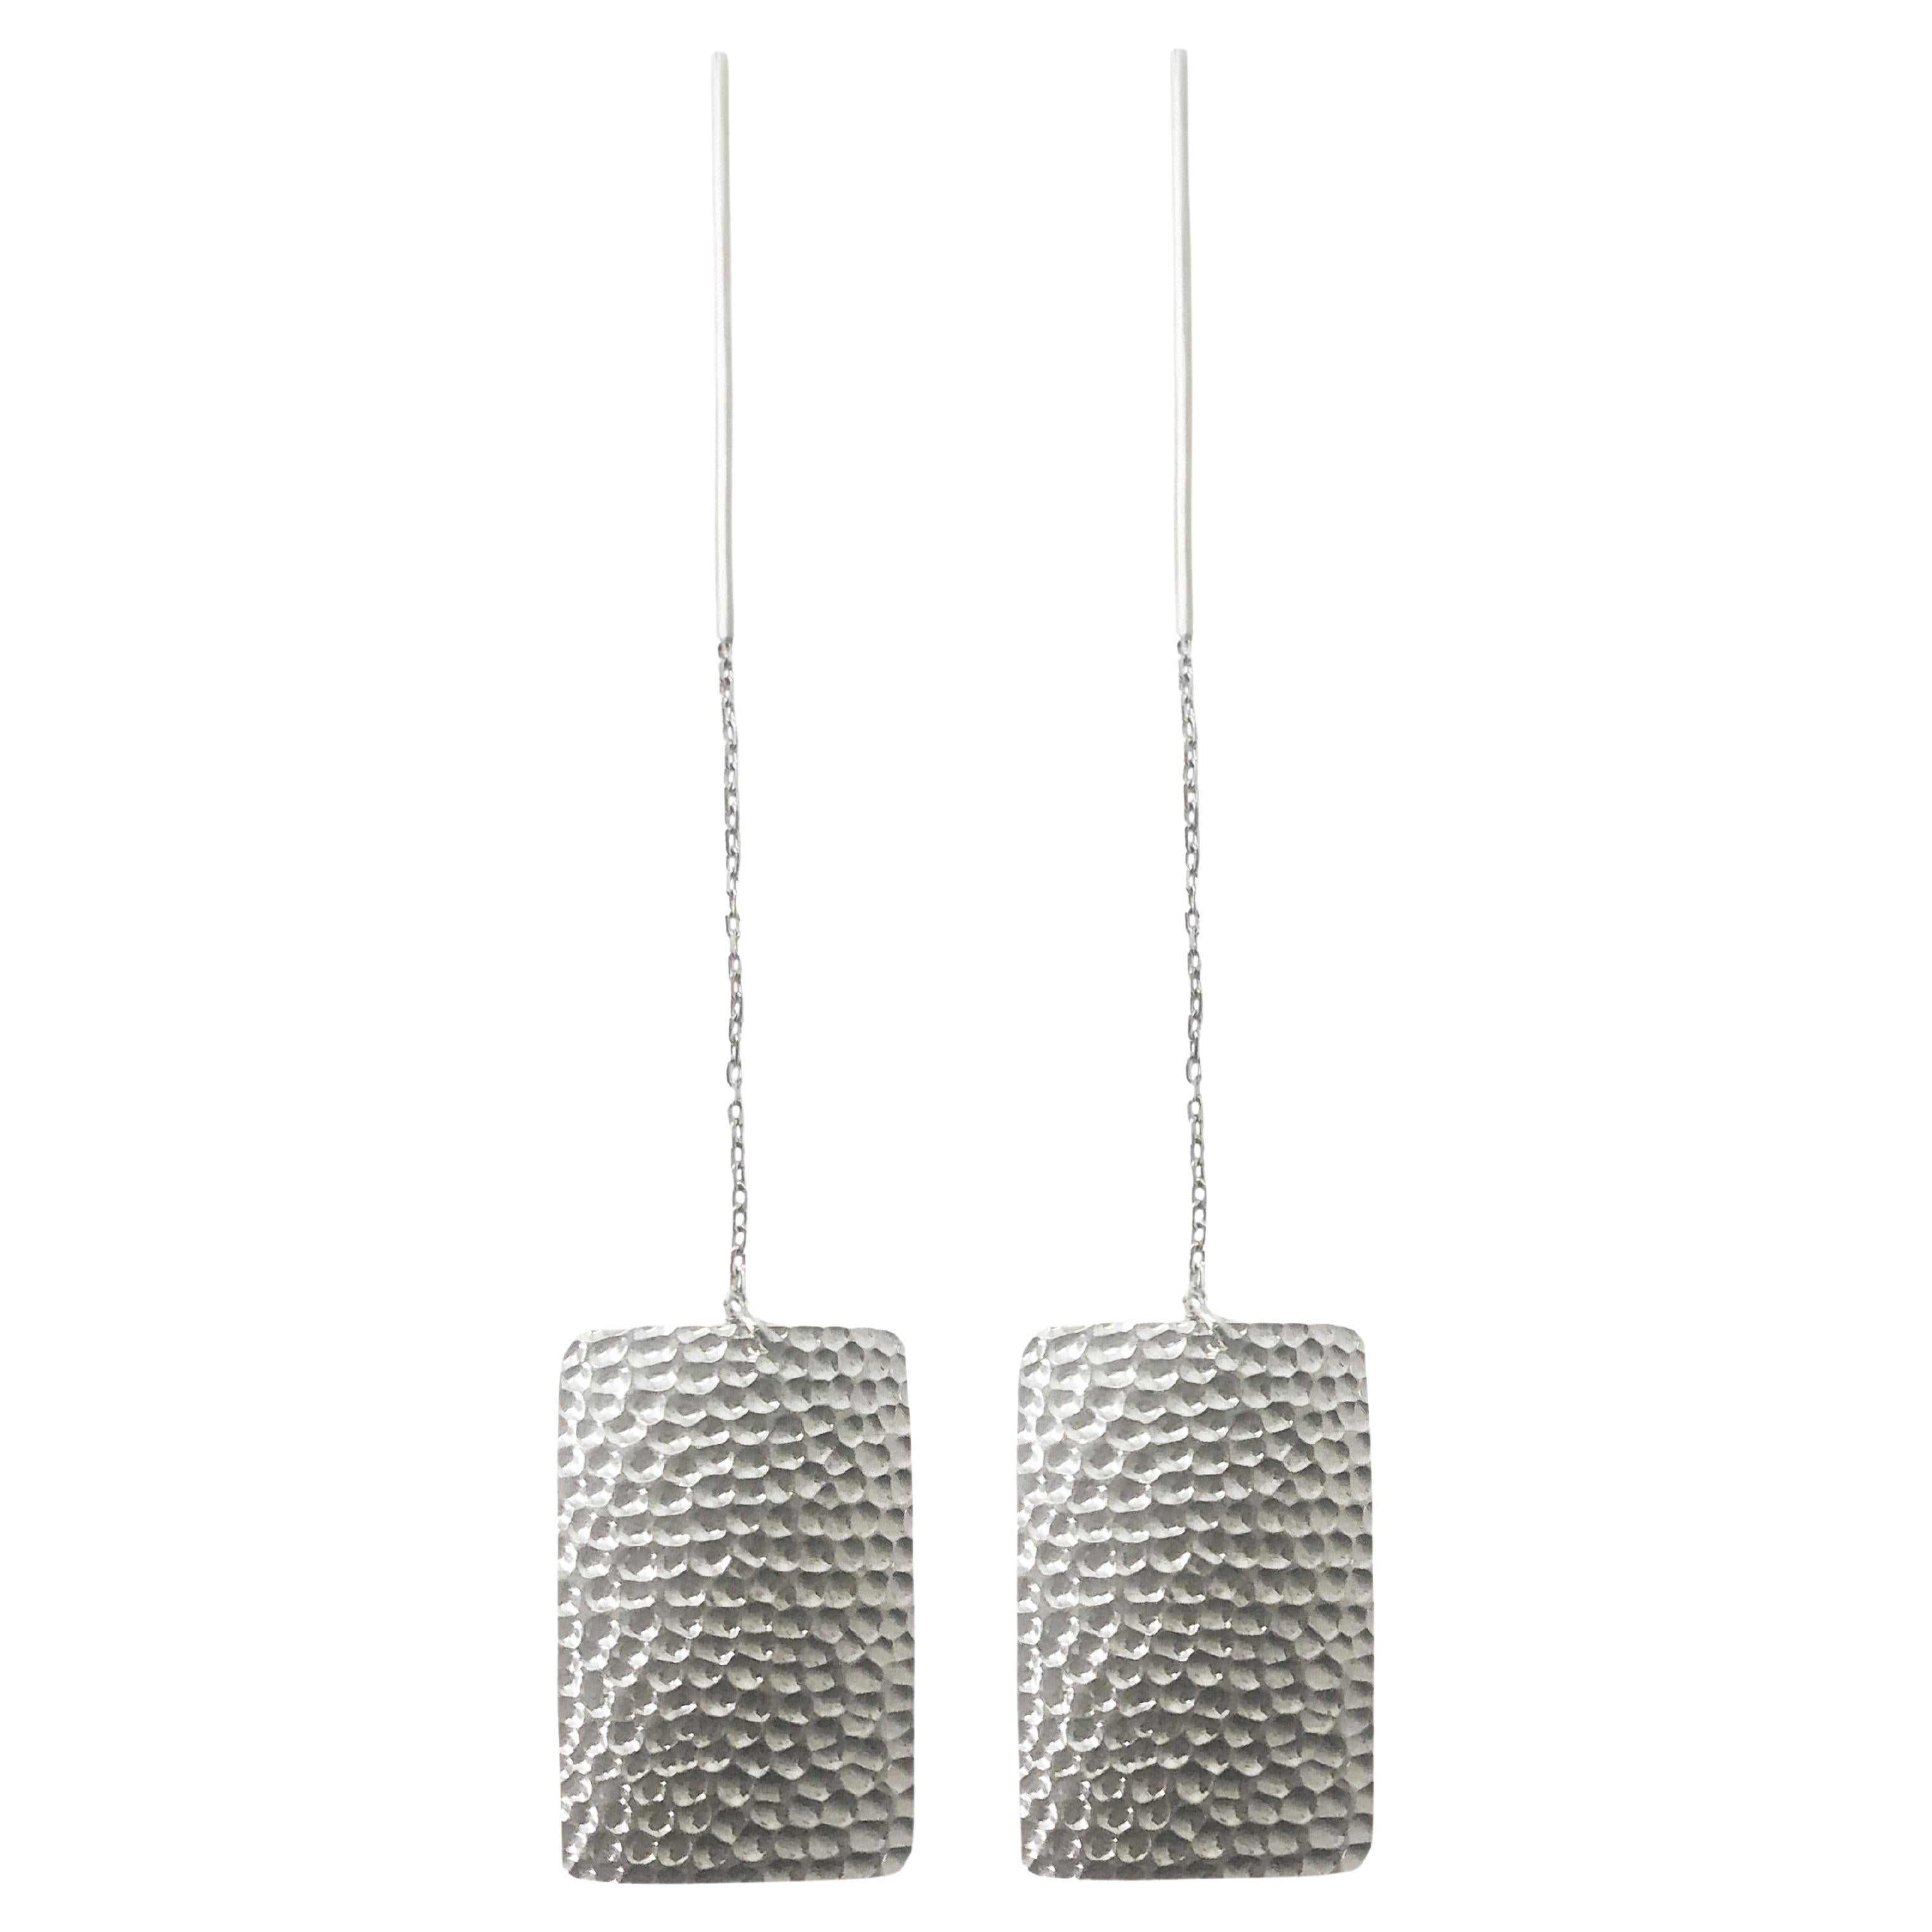 Pendant contemporary threaders chain Pair earrings with minimalisticdots texture For Sale